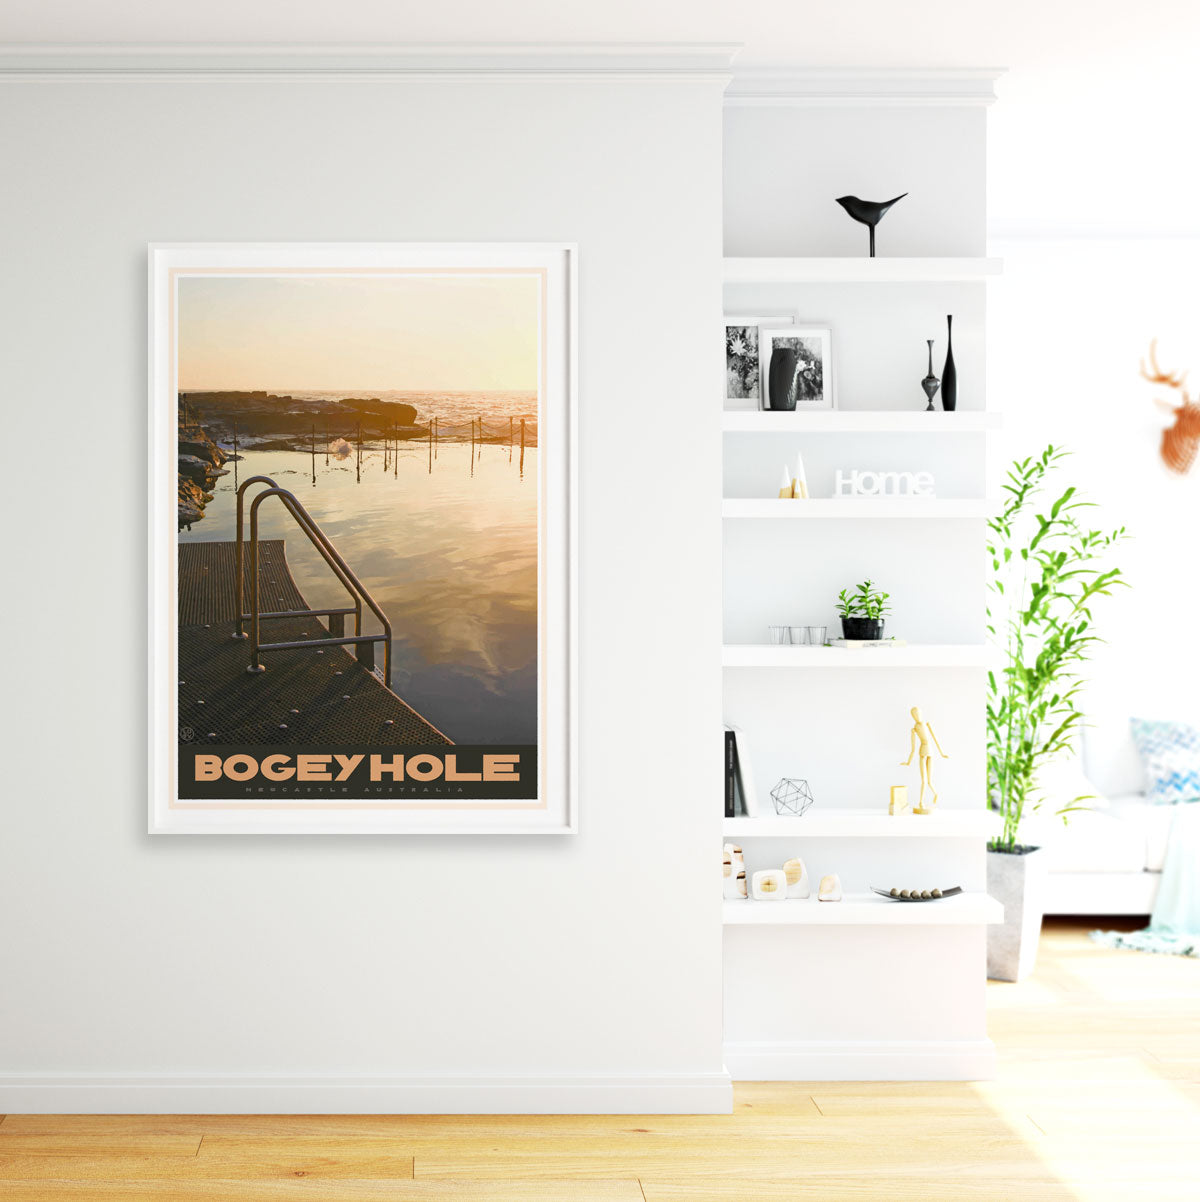 Newcastle Bogey Hole vintage travel style poster - places we luv